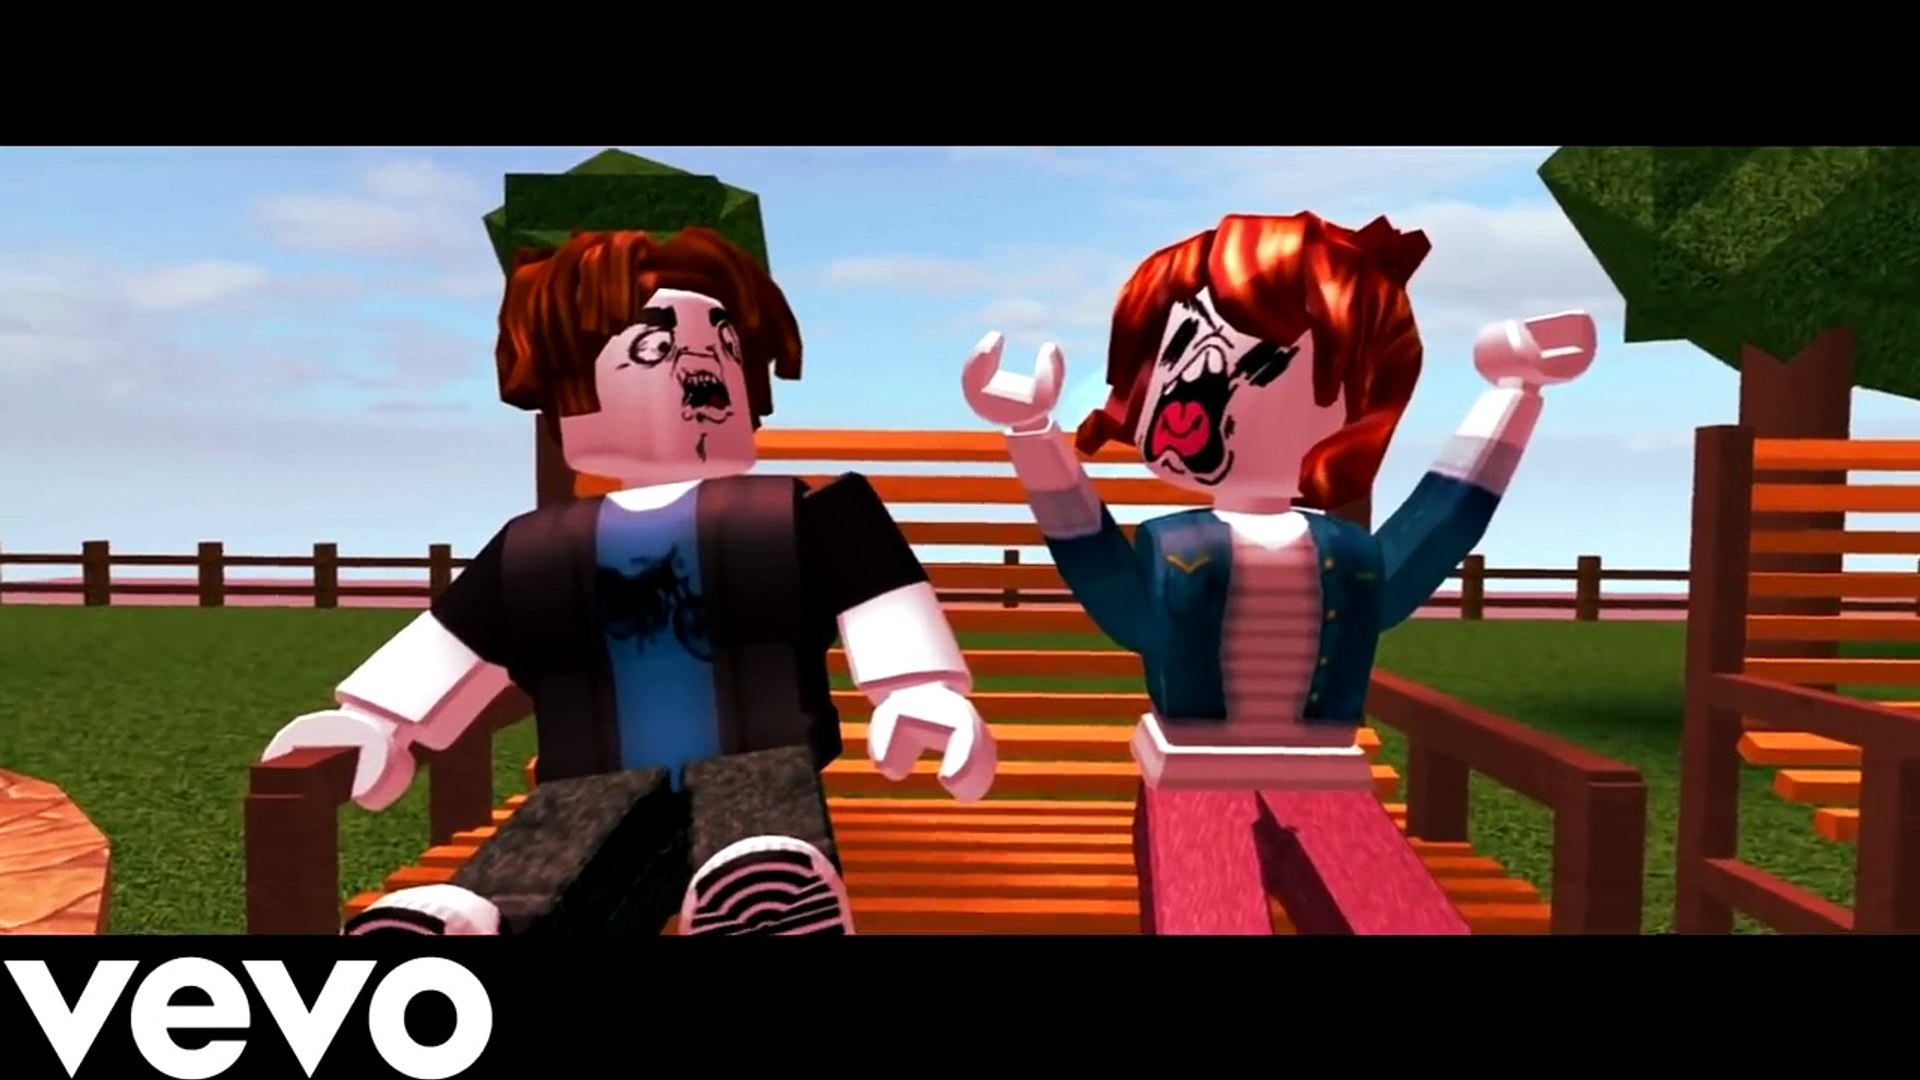 weave challege song roblox